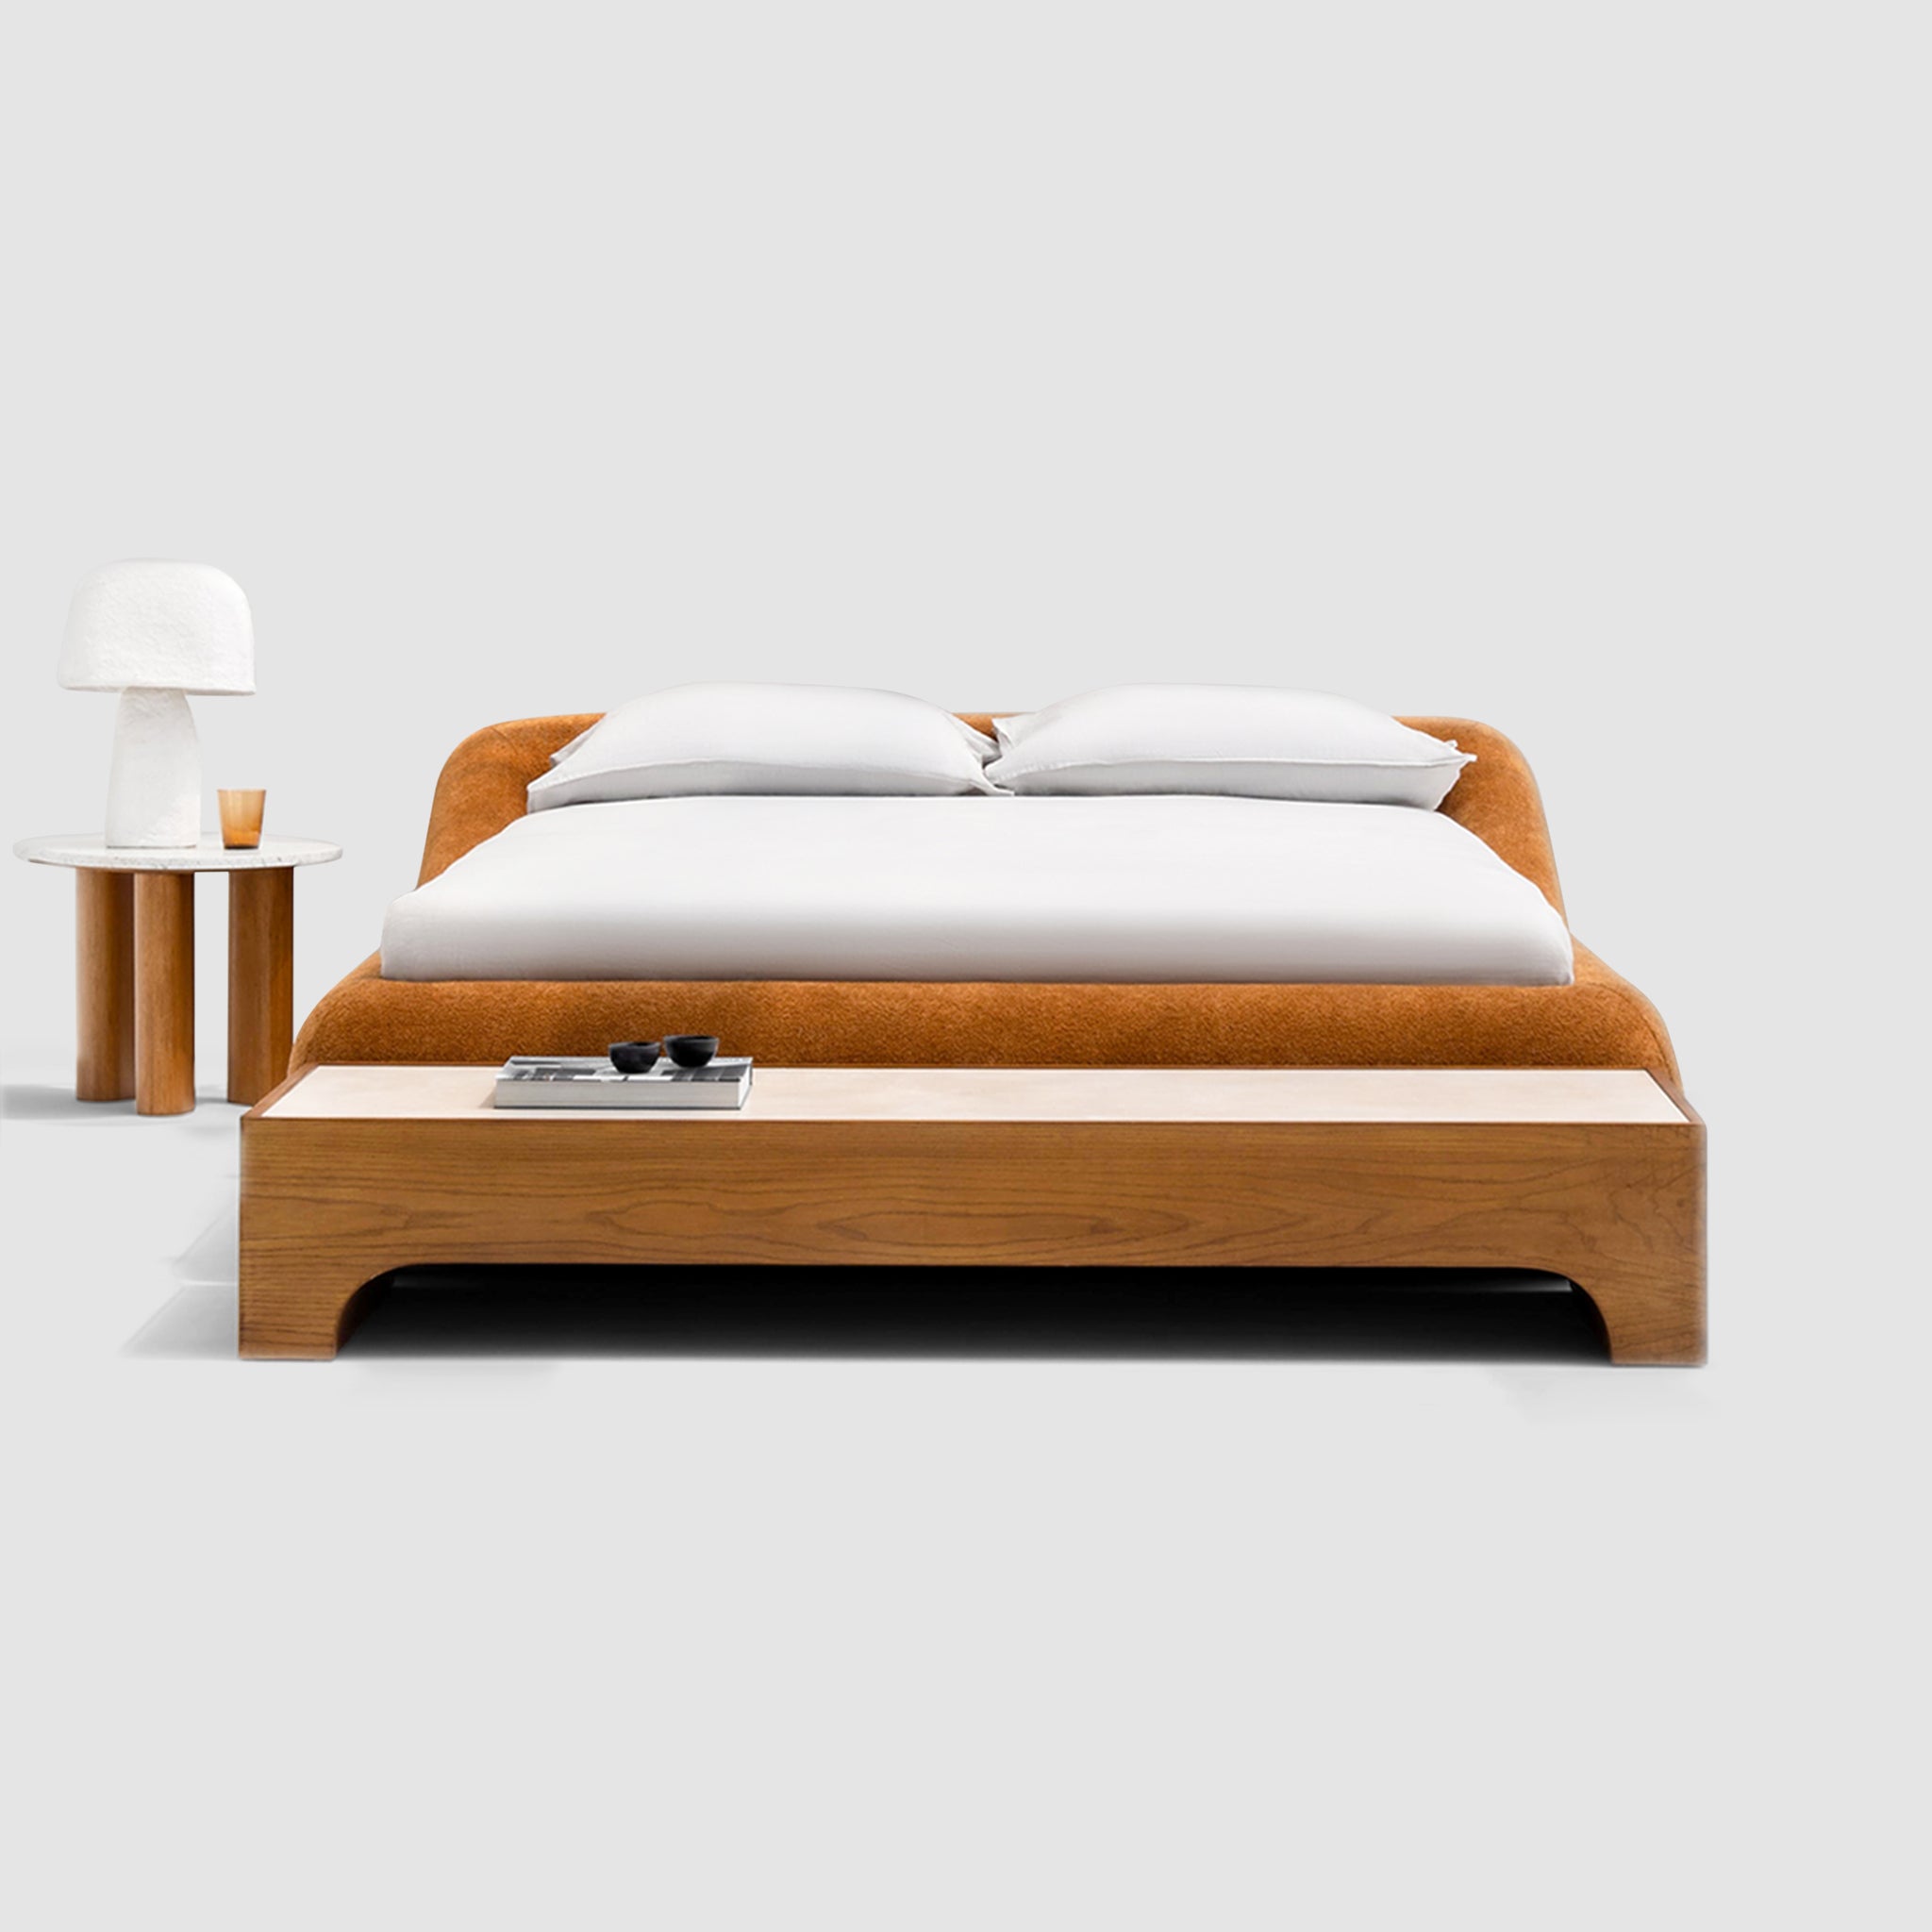 Sleek, charcoal gray king-size platform bed with a minimalist button-tufted headboard rests on a light wood floor. The Alain Bed by Klettkic is crafted from solid wood for a touch of modern luxury in a minimalist bedroom.